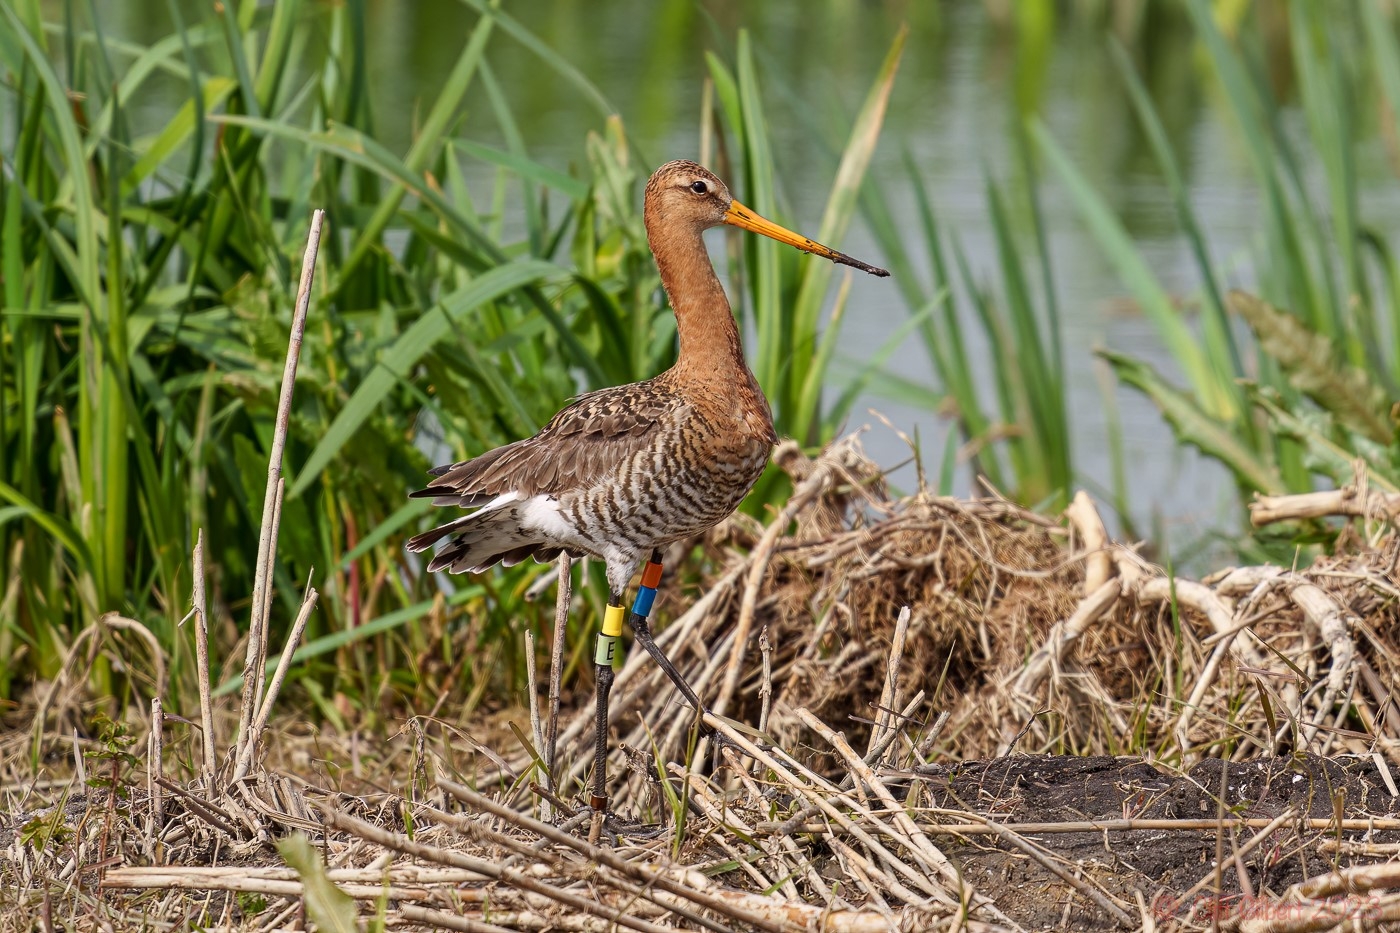 Conservation charities celebrate regional revival of rare wading bird with free event